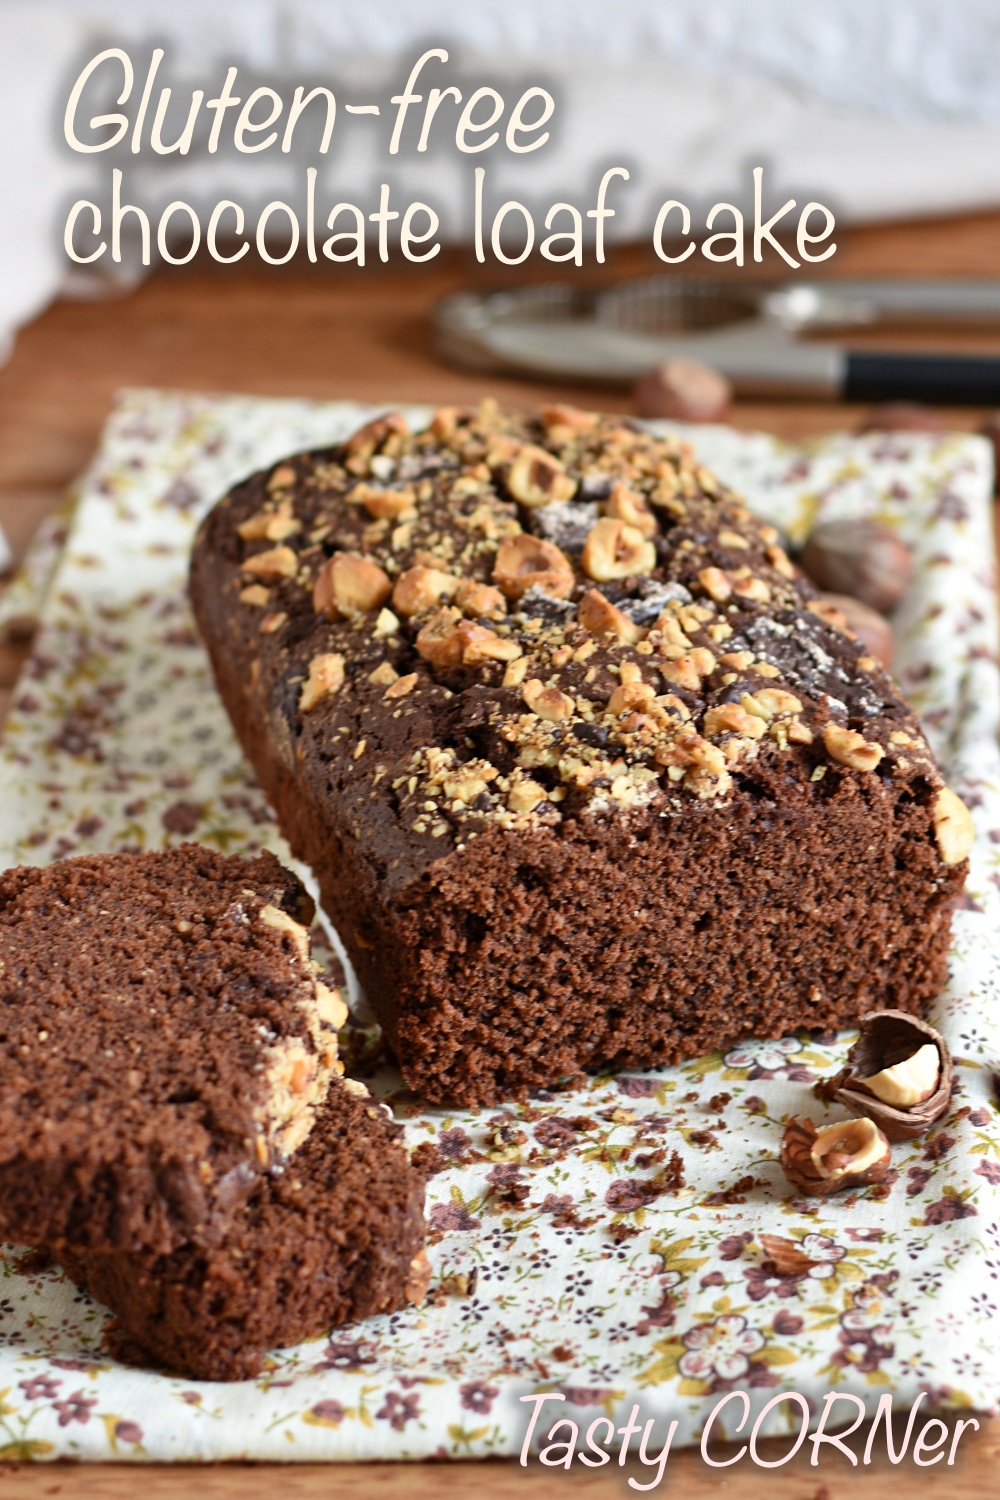 en_v_ Gluten-free chocolate loaf cake with rice flour fudgy moist for breakfast by tastycorner